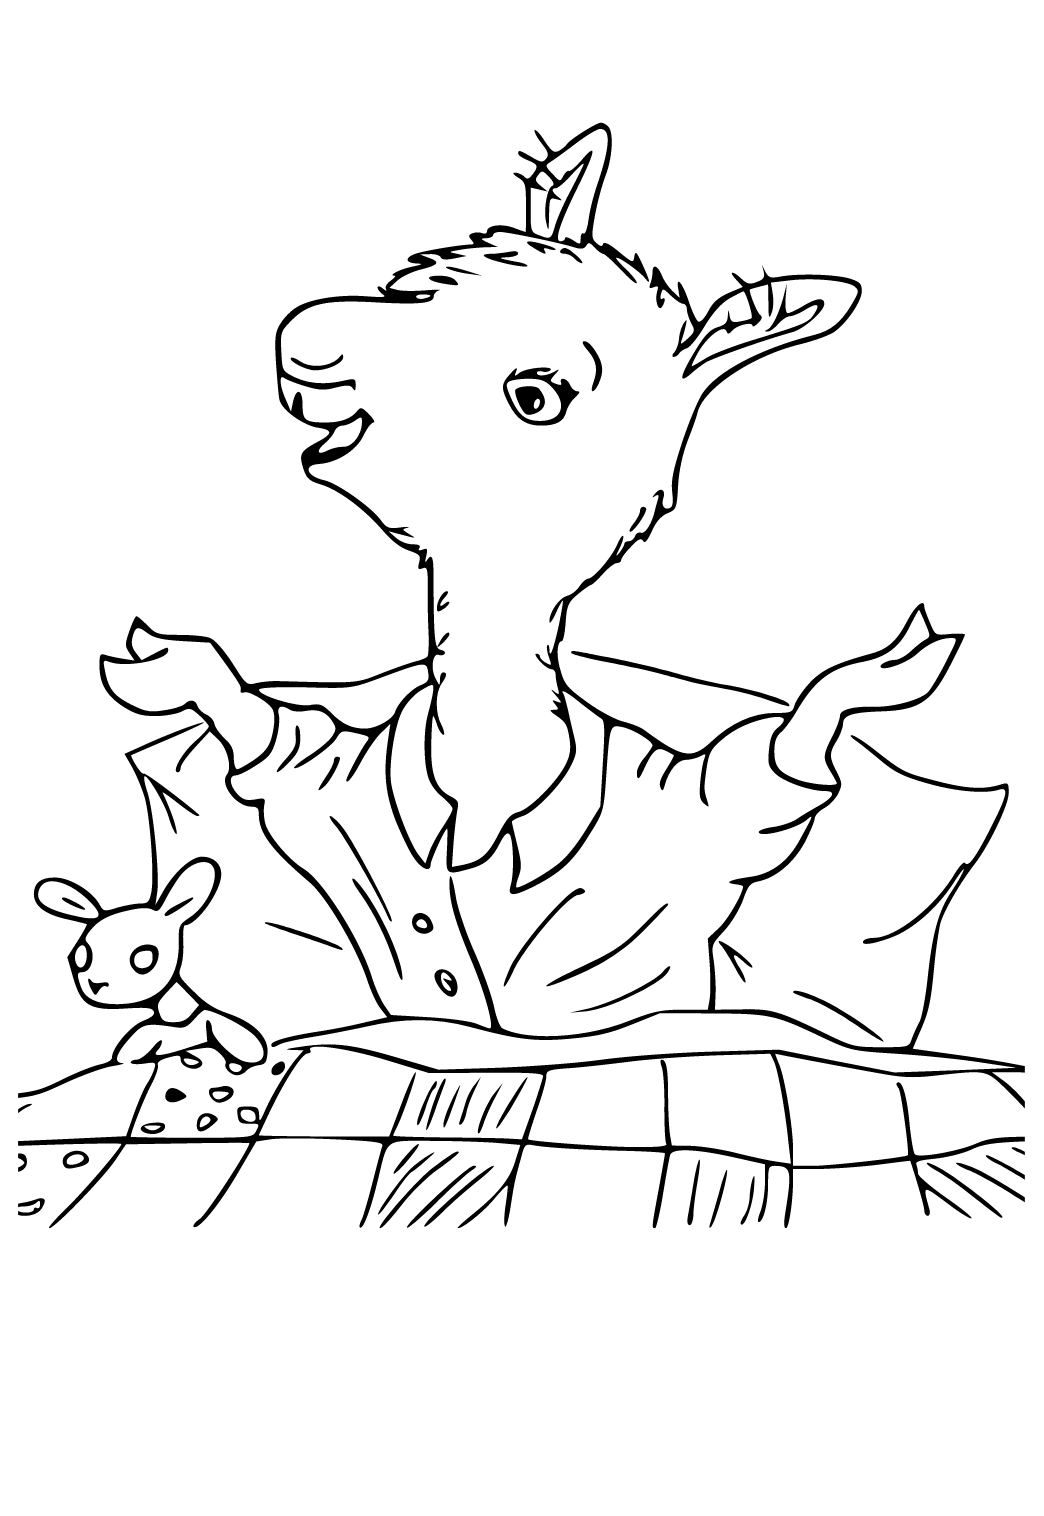 Free Printable Llama Sleep Coloring Page, Sheet and Picture for Adults and  Kids (Girls and Boys) - Babeled.com